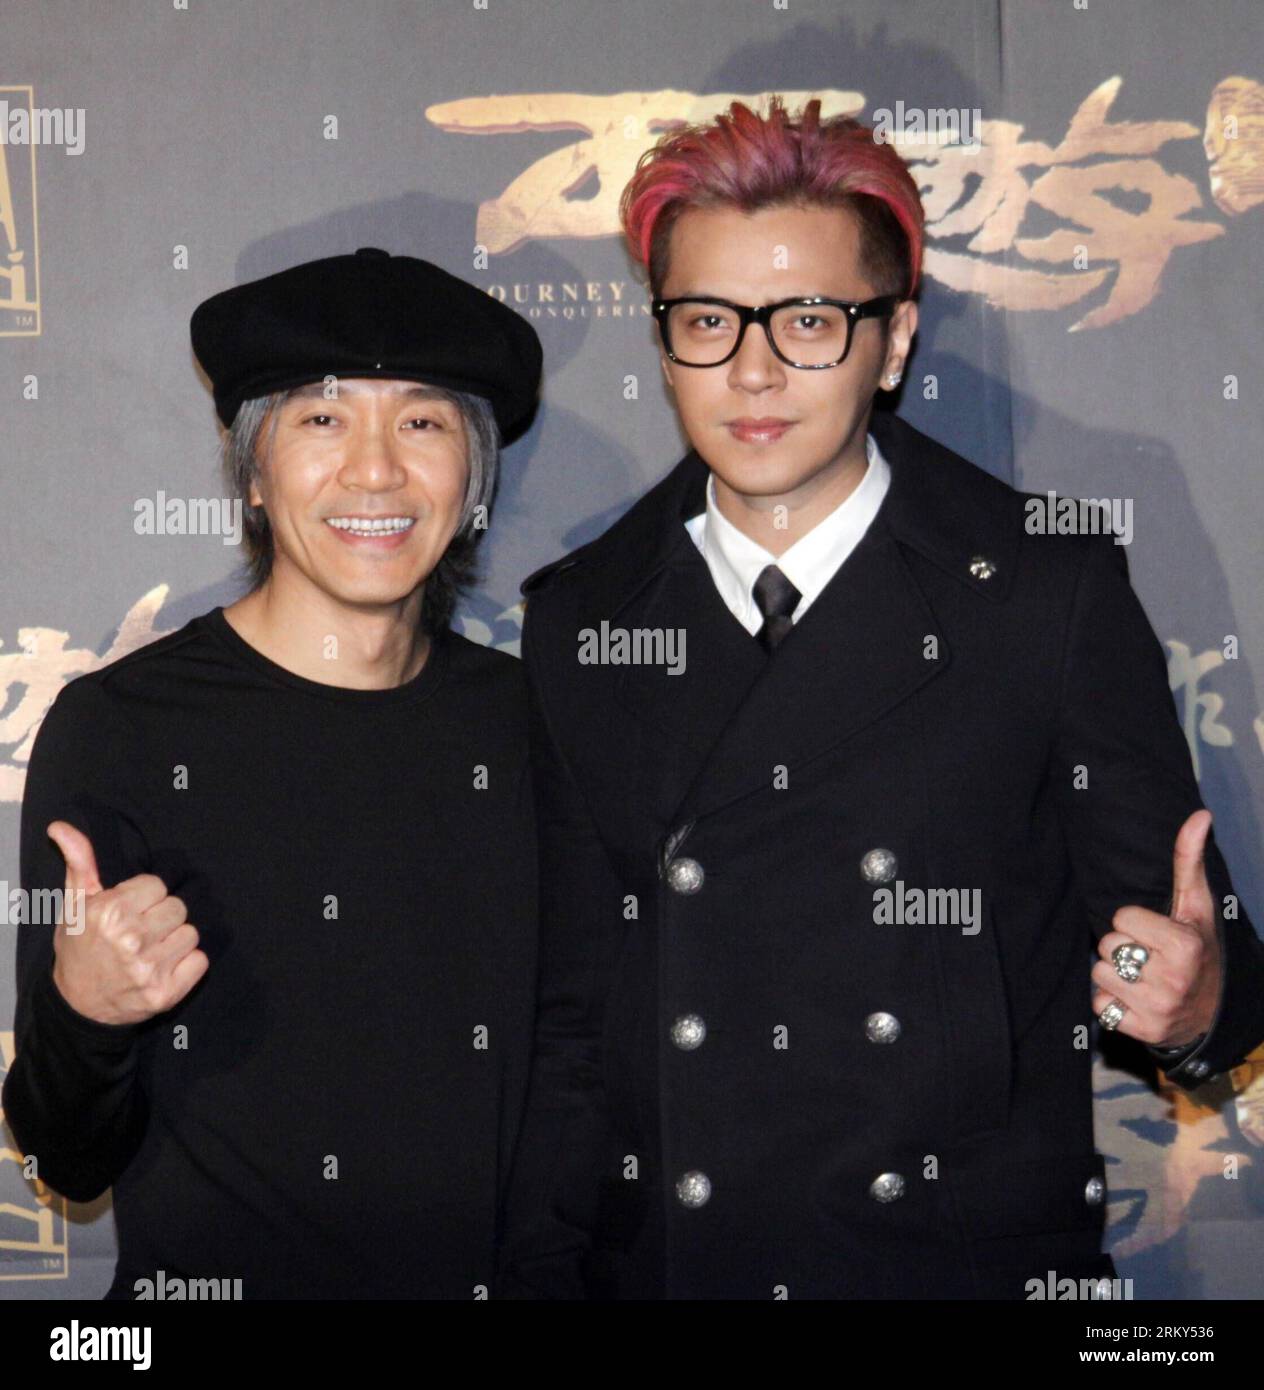 Bildnummer: 59146050  Datum: 28.01.2013  Copyright: imago/Xinhua (130128) -- TAIPEI, Jan. 28, 2013 (Xinhua) -- Director Stephen Chow (L) and actor Show Lo pose for photo during a press conference of the movie Journey to the West: Conquering the Demons in Taipei, southeast China s Taiwan, Jan. 28, 2013. The movie is expected to hit the screen on Feb. 7, 2013 in Taipei. (Xinhua) (mp) CHINA-TAIPEI-MOVIE-PRESS CONFERENCE (CN) PUBLICATIONxNOTxINxCHN Entertainment Kultur People PK Film Premiere Filmpremiere Die Reise nach Westen x0x xdd 2013 quadrat premiumd      59146050 Date 28 01 2013 Copyright I Stock Photo